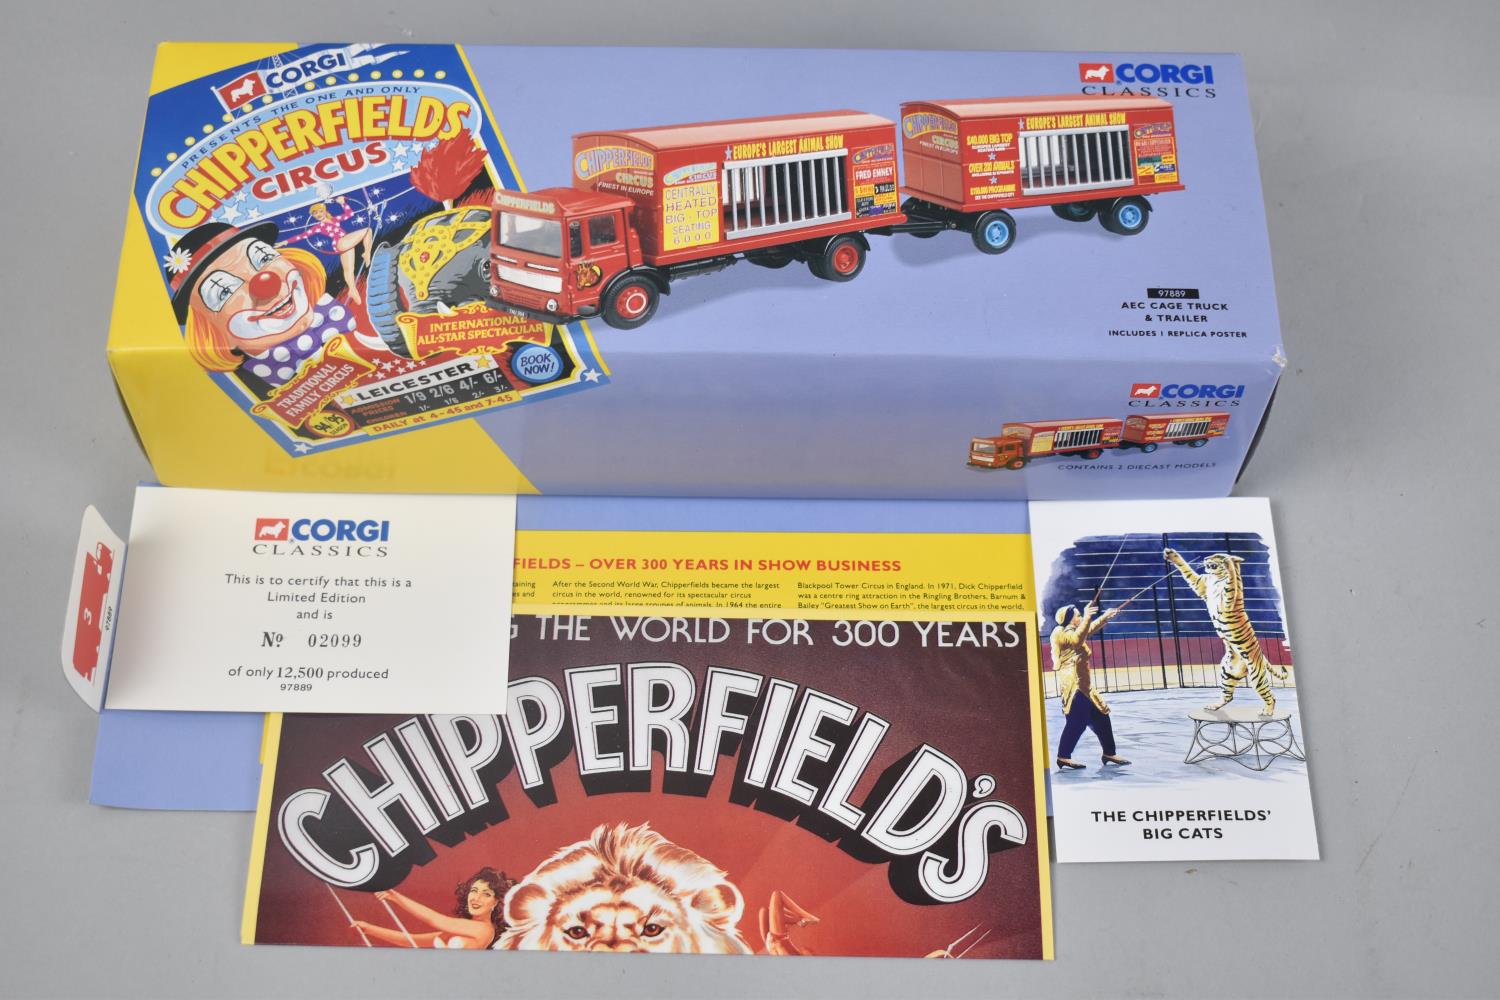 A New Boxed Chipperfield Circus Set AEC Caged Truck and Trailer, No 97889